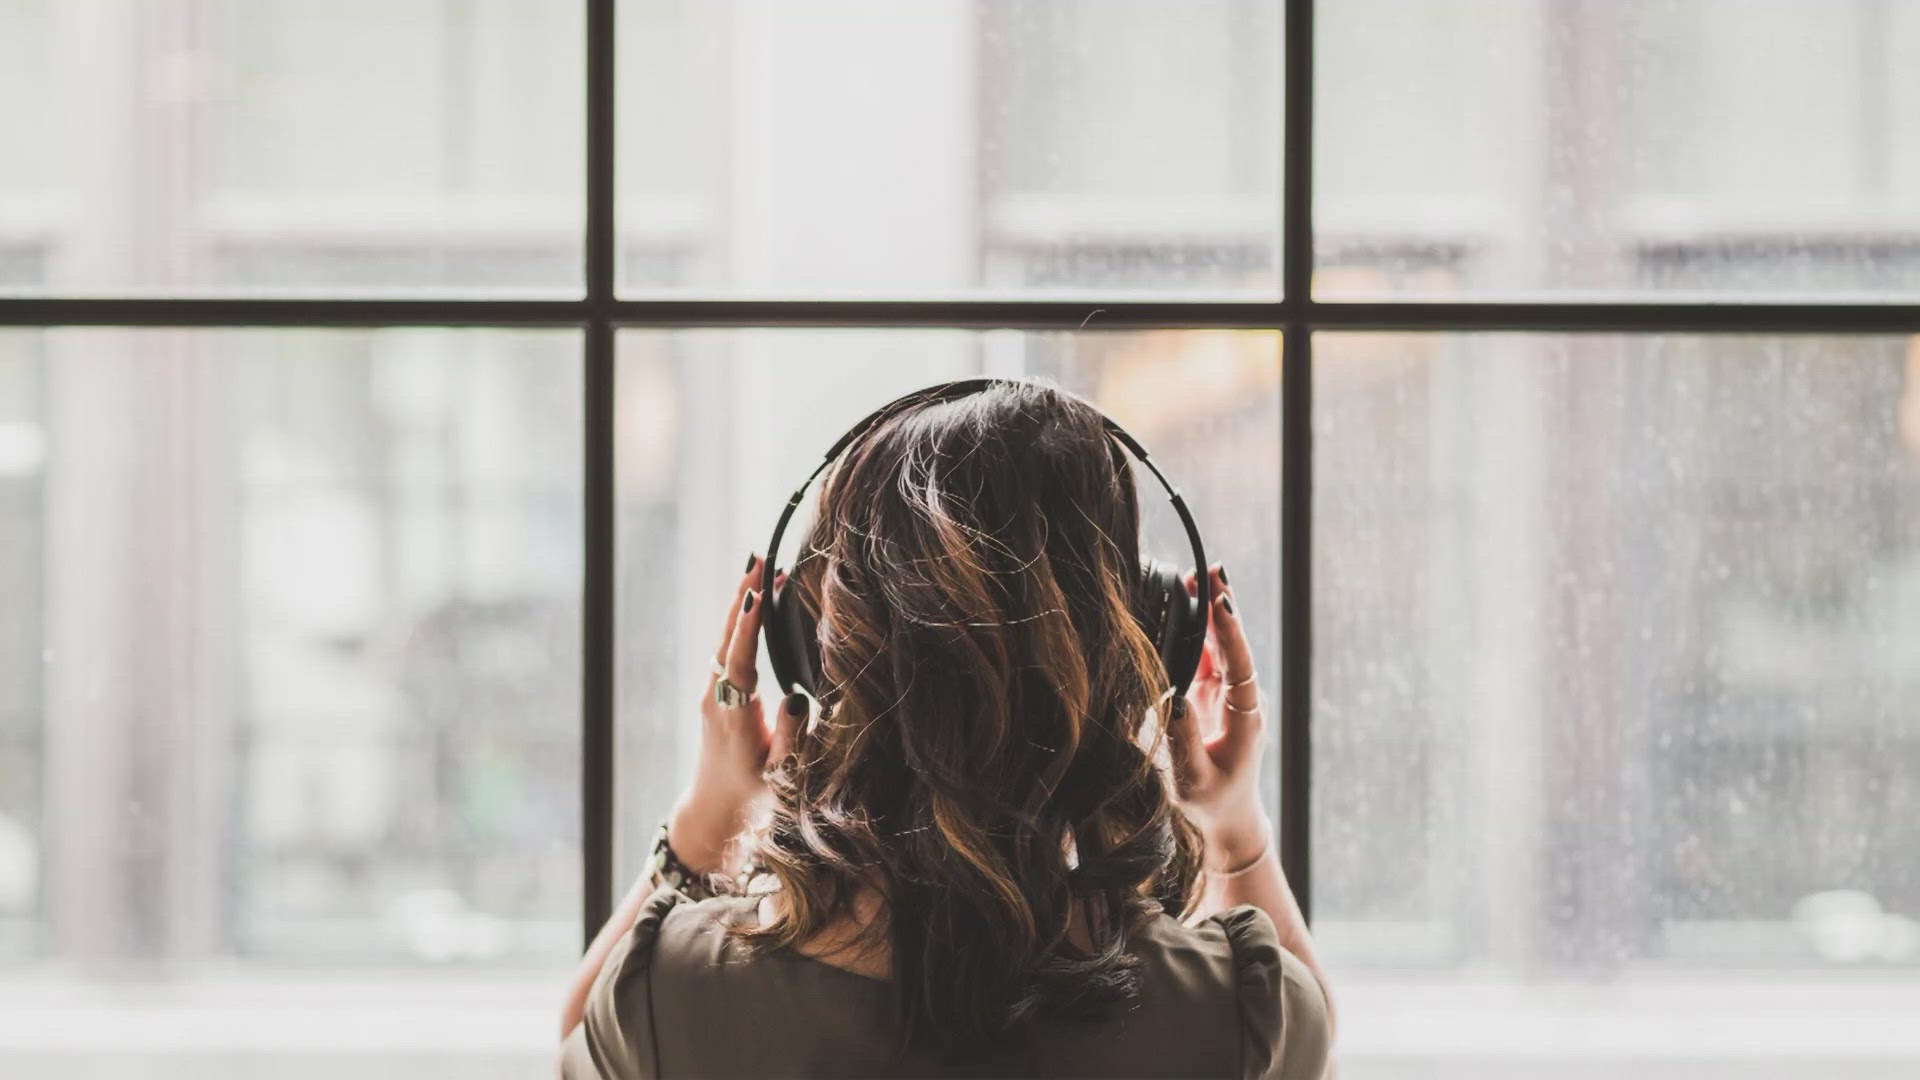 Listening to pink noise could increase relaxation.